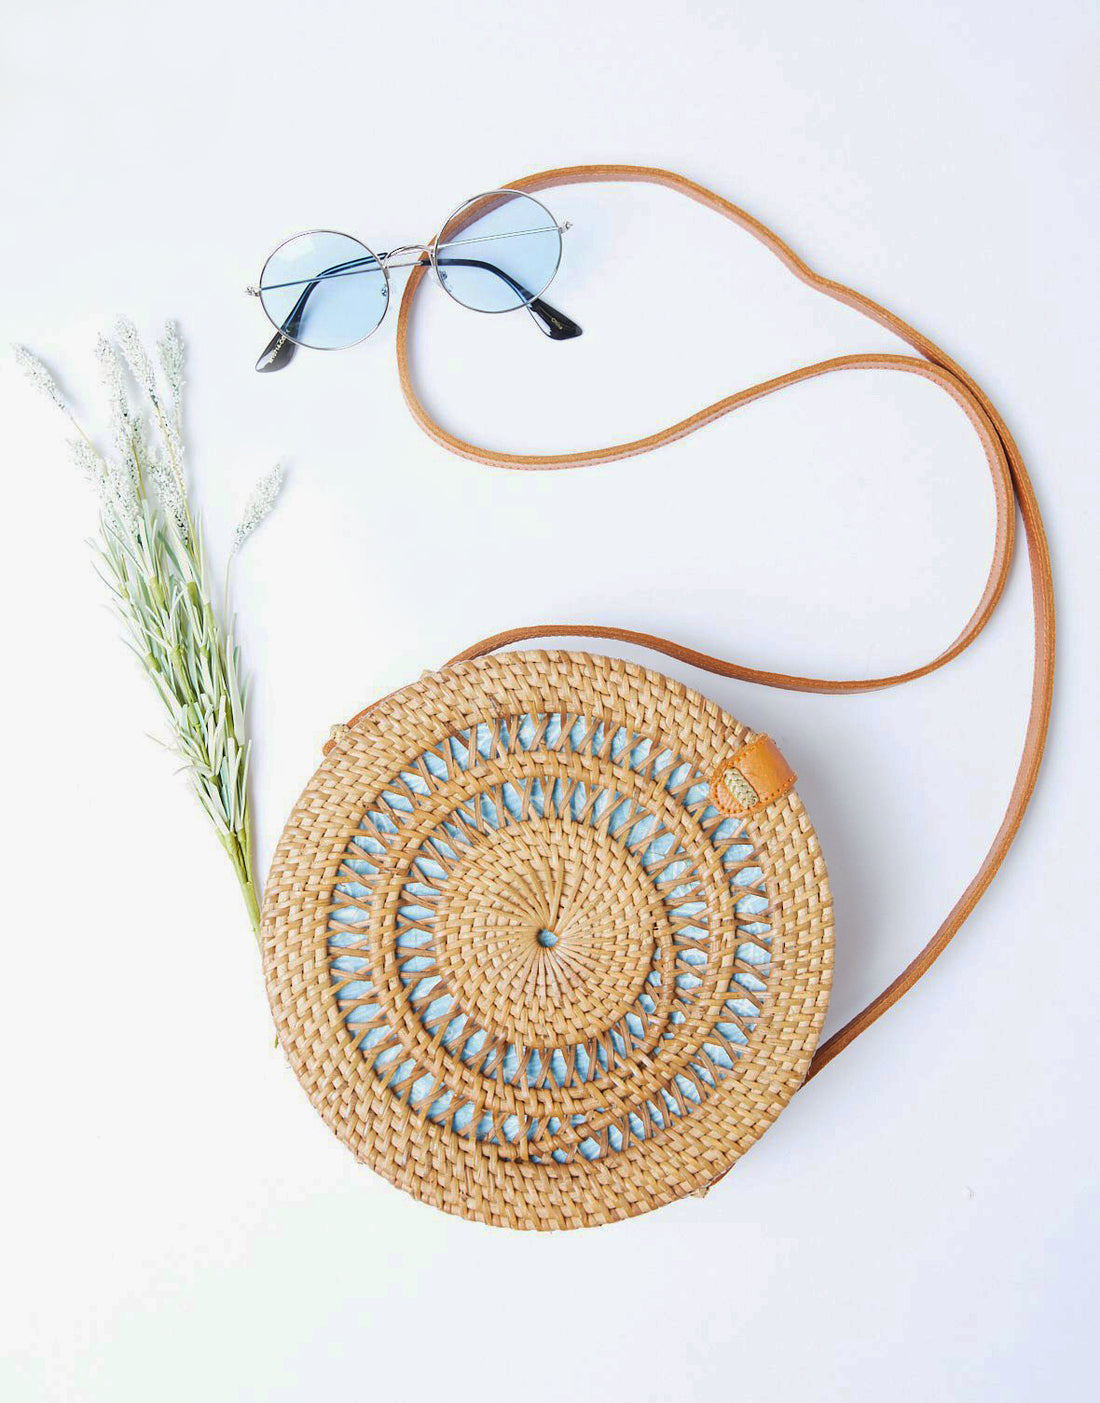 Near and Far Round Straw Bag Accessories Tan One Size -2020AVE